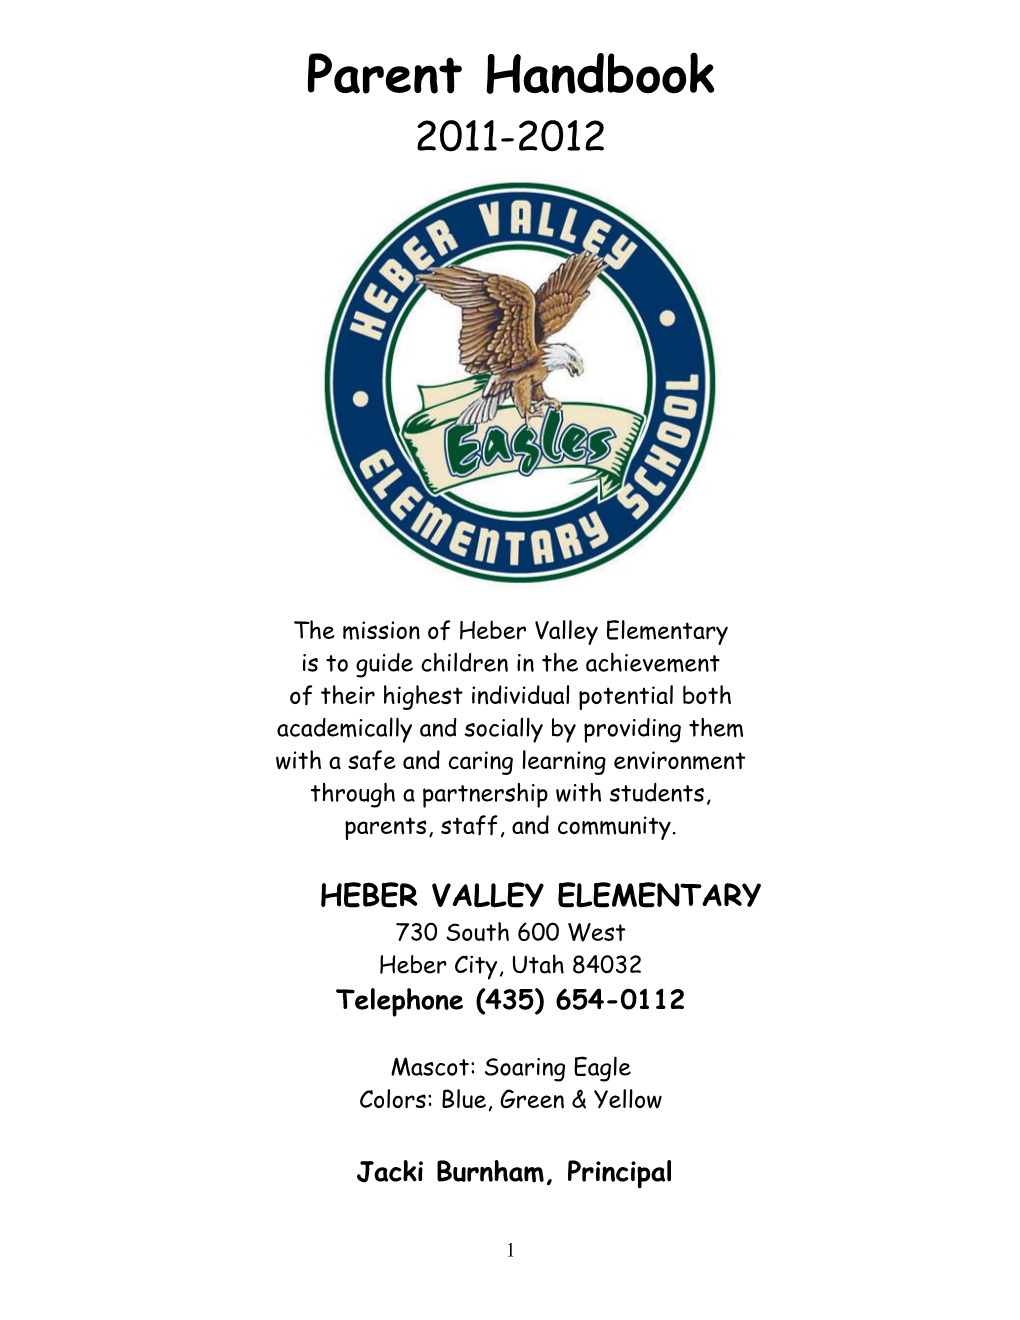 The Mission of Heber Valley Elementary